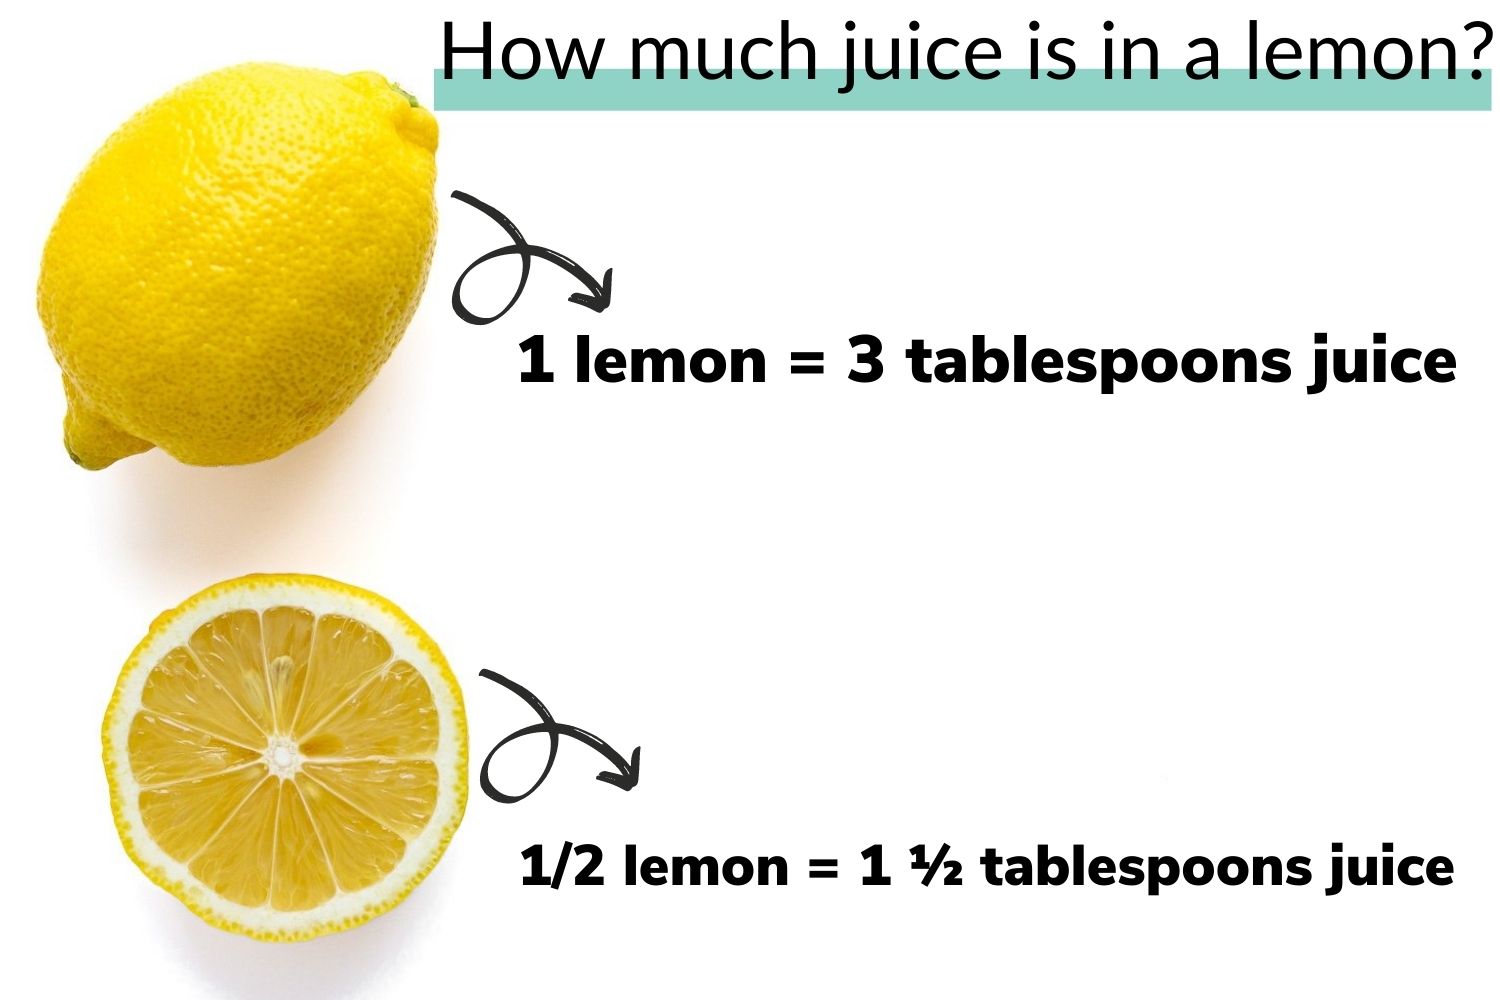 Graphic showing how much juice is in a whole lemon and half a lemon.